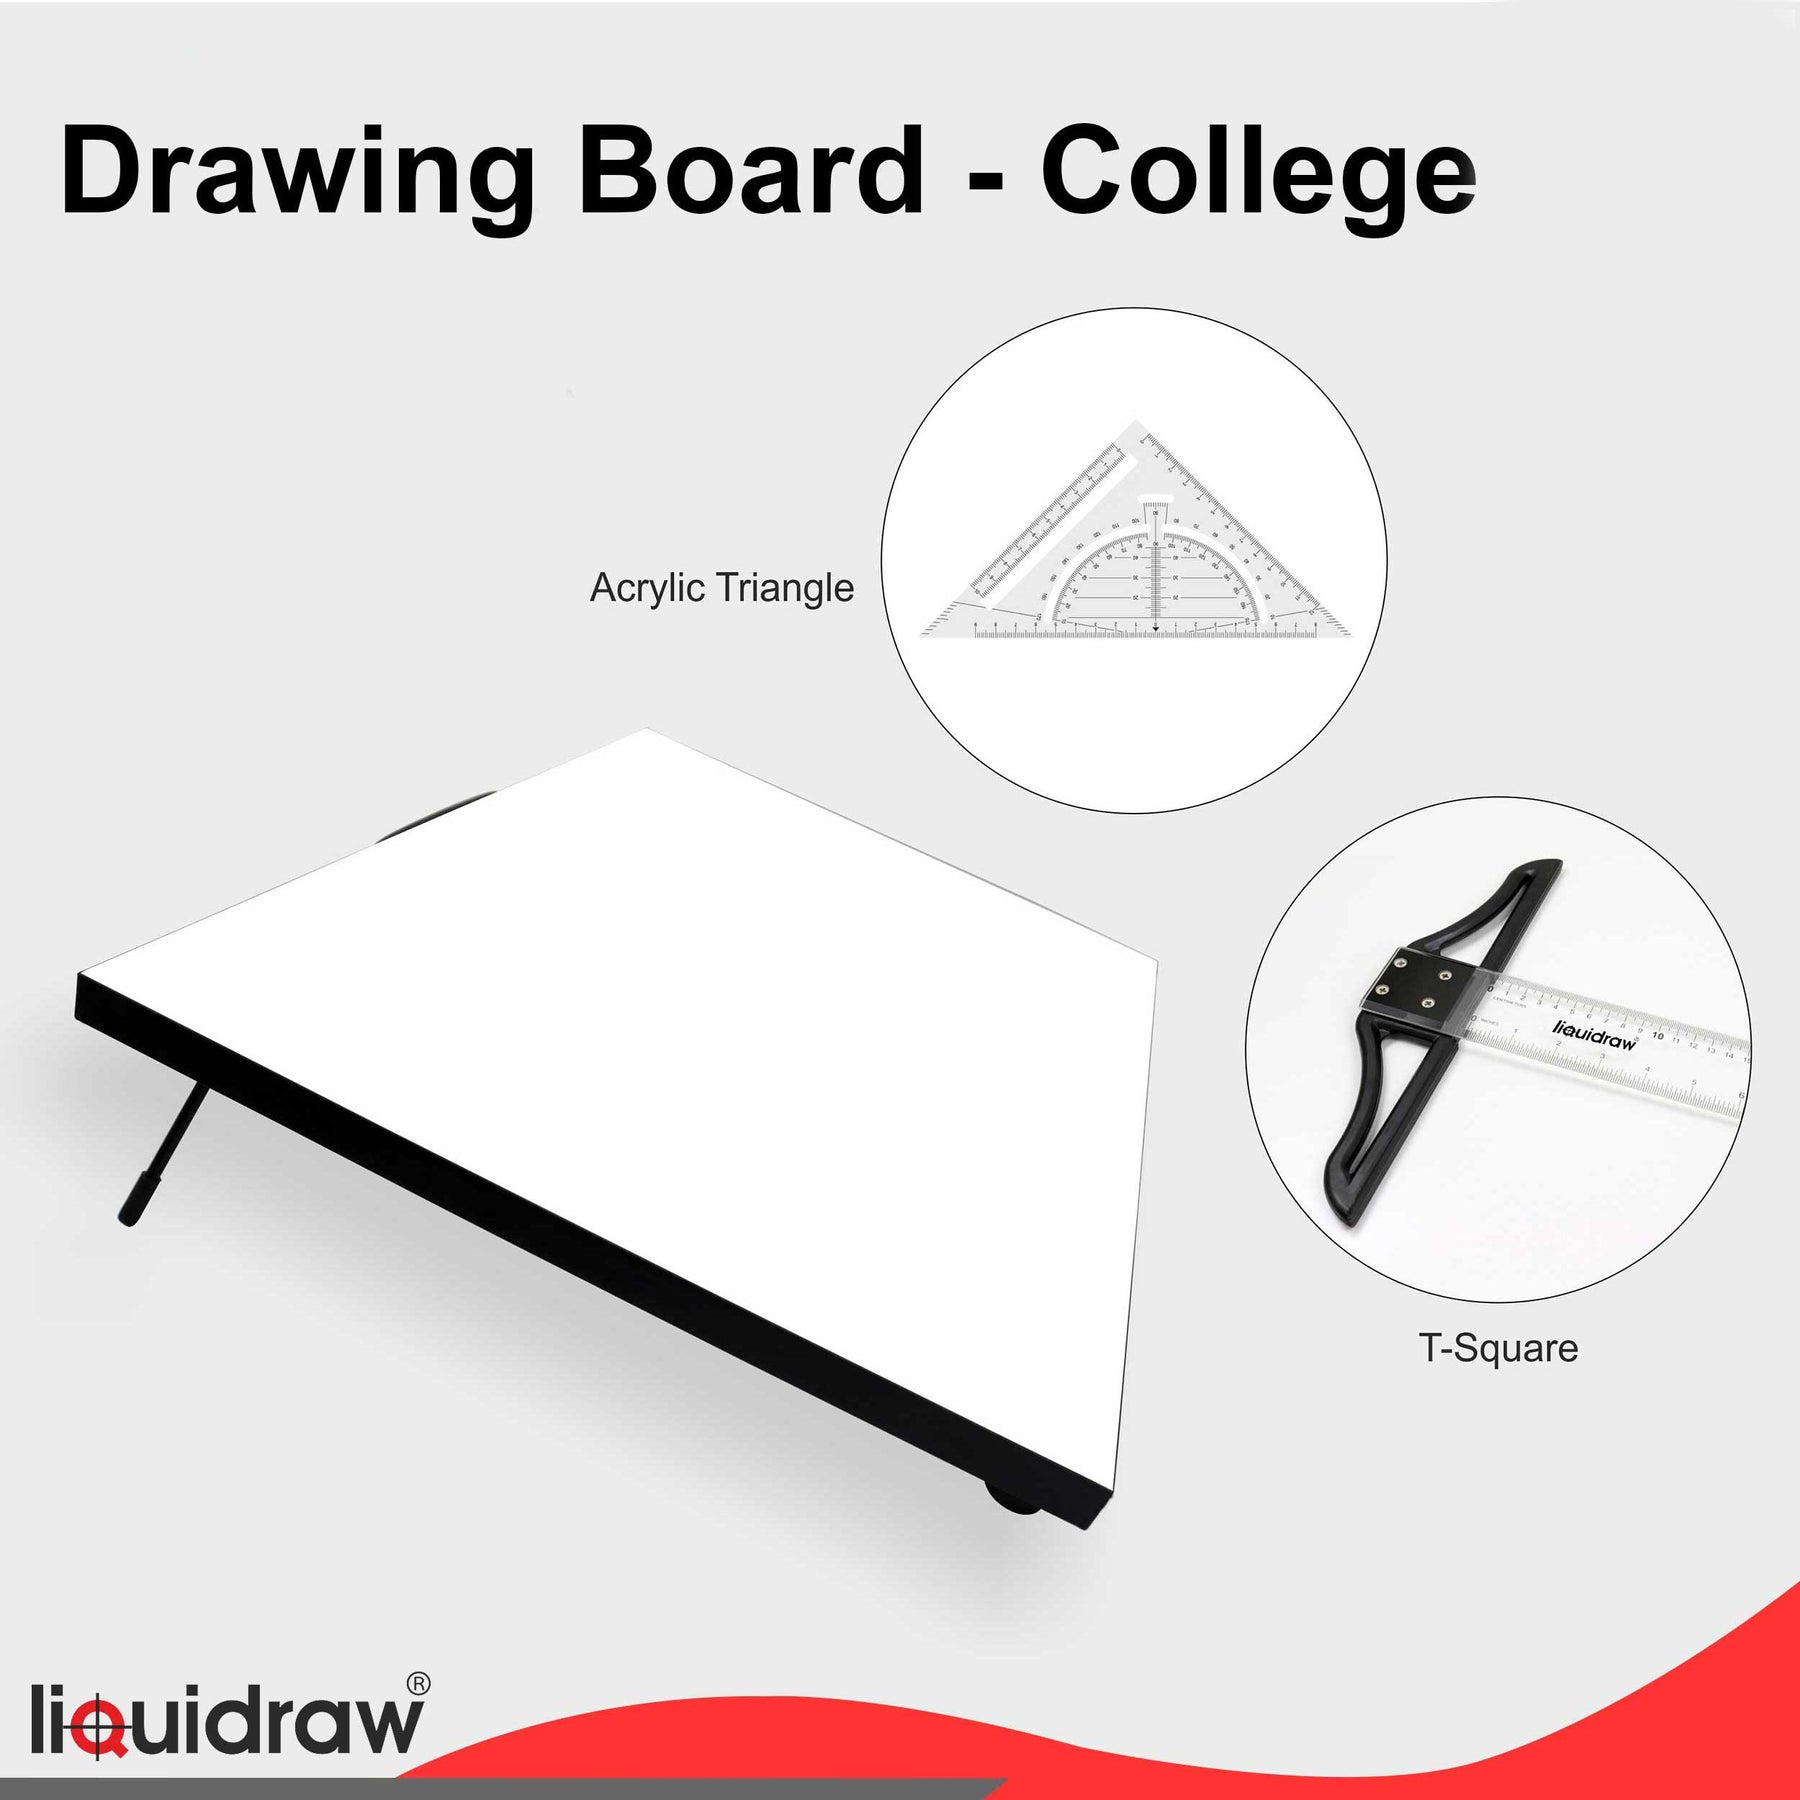 Liquidraw Desk Easel Artists A2 Drawing Board Table Stand 5 Adjustable  Angles